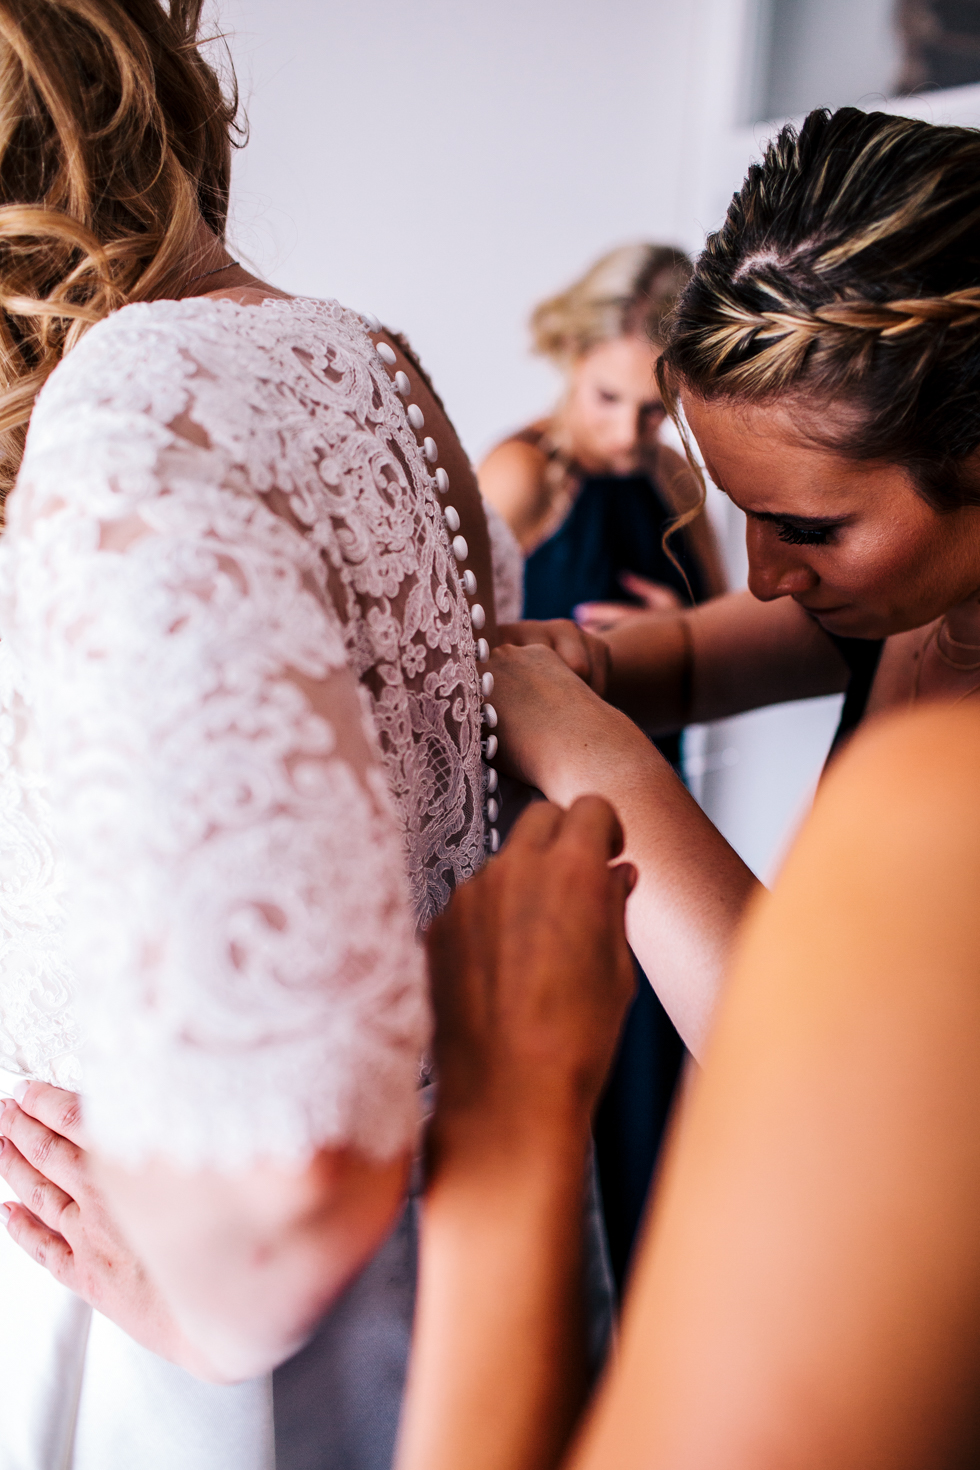 bridesmaids helping with buttons on brides dress